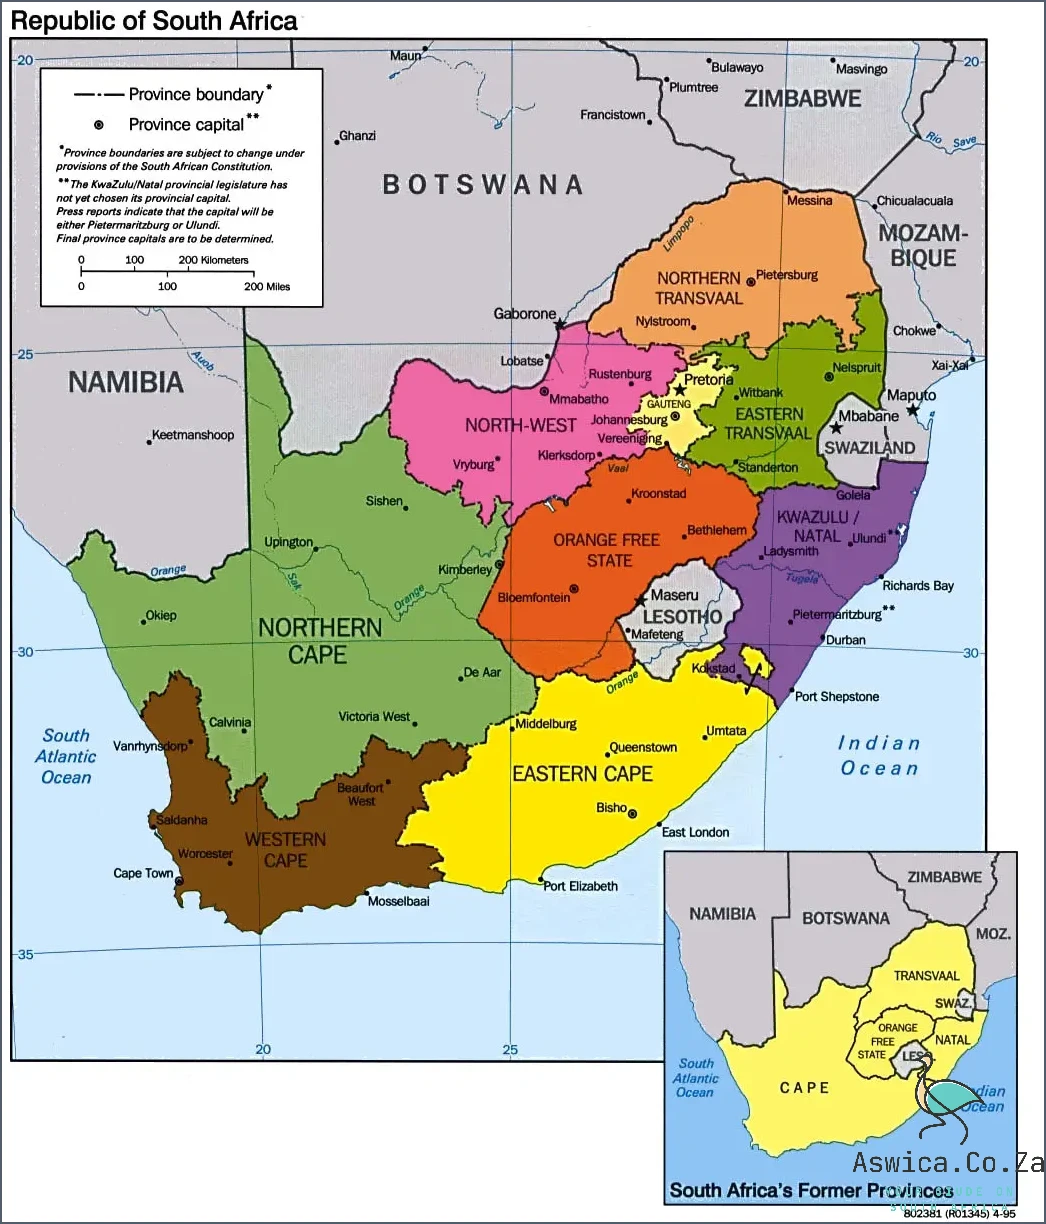 Stunning South Africa Map Images Revealed 1.webp